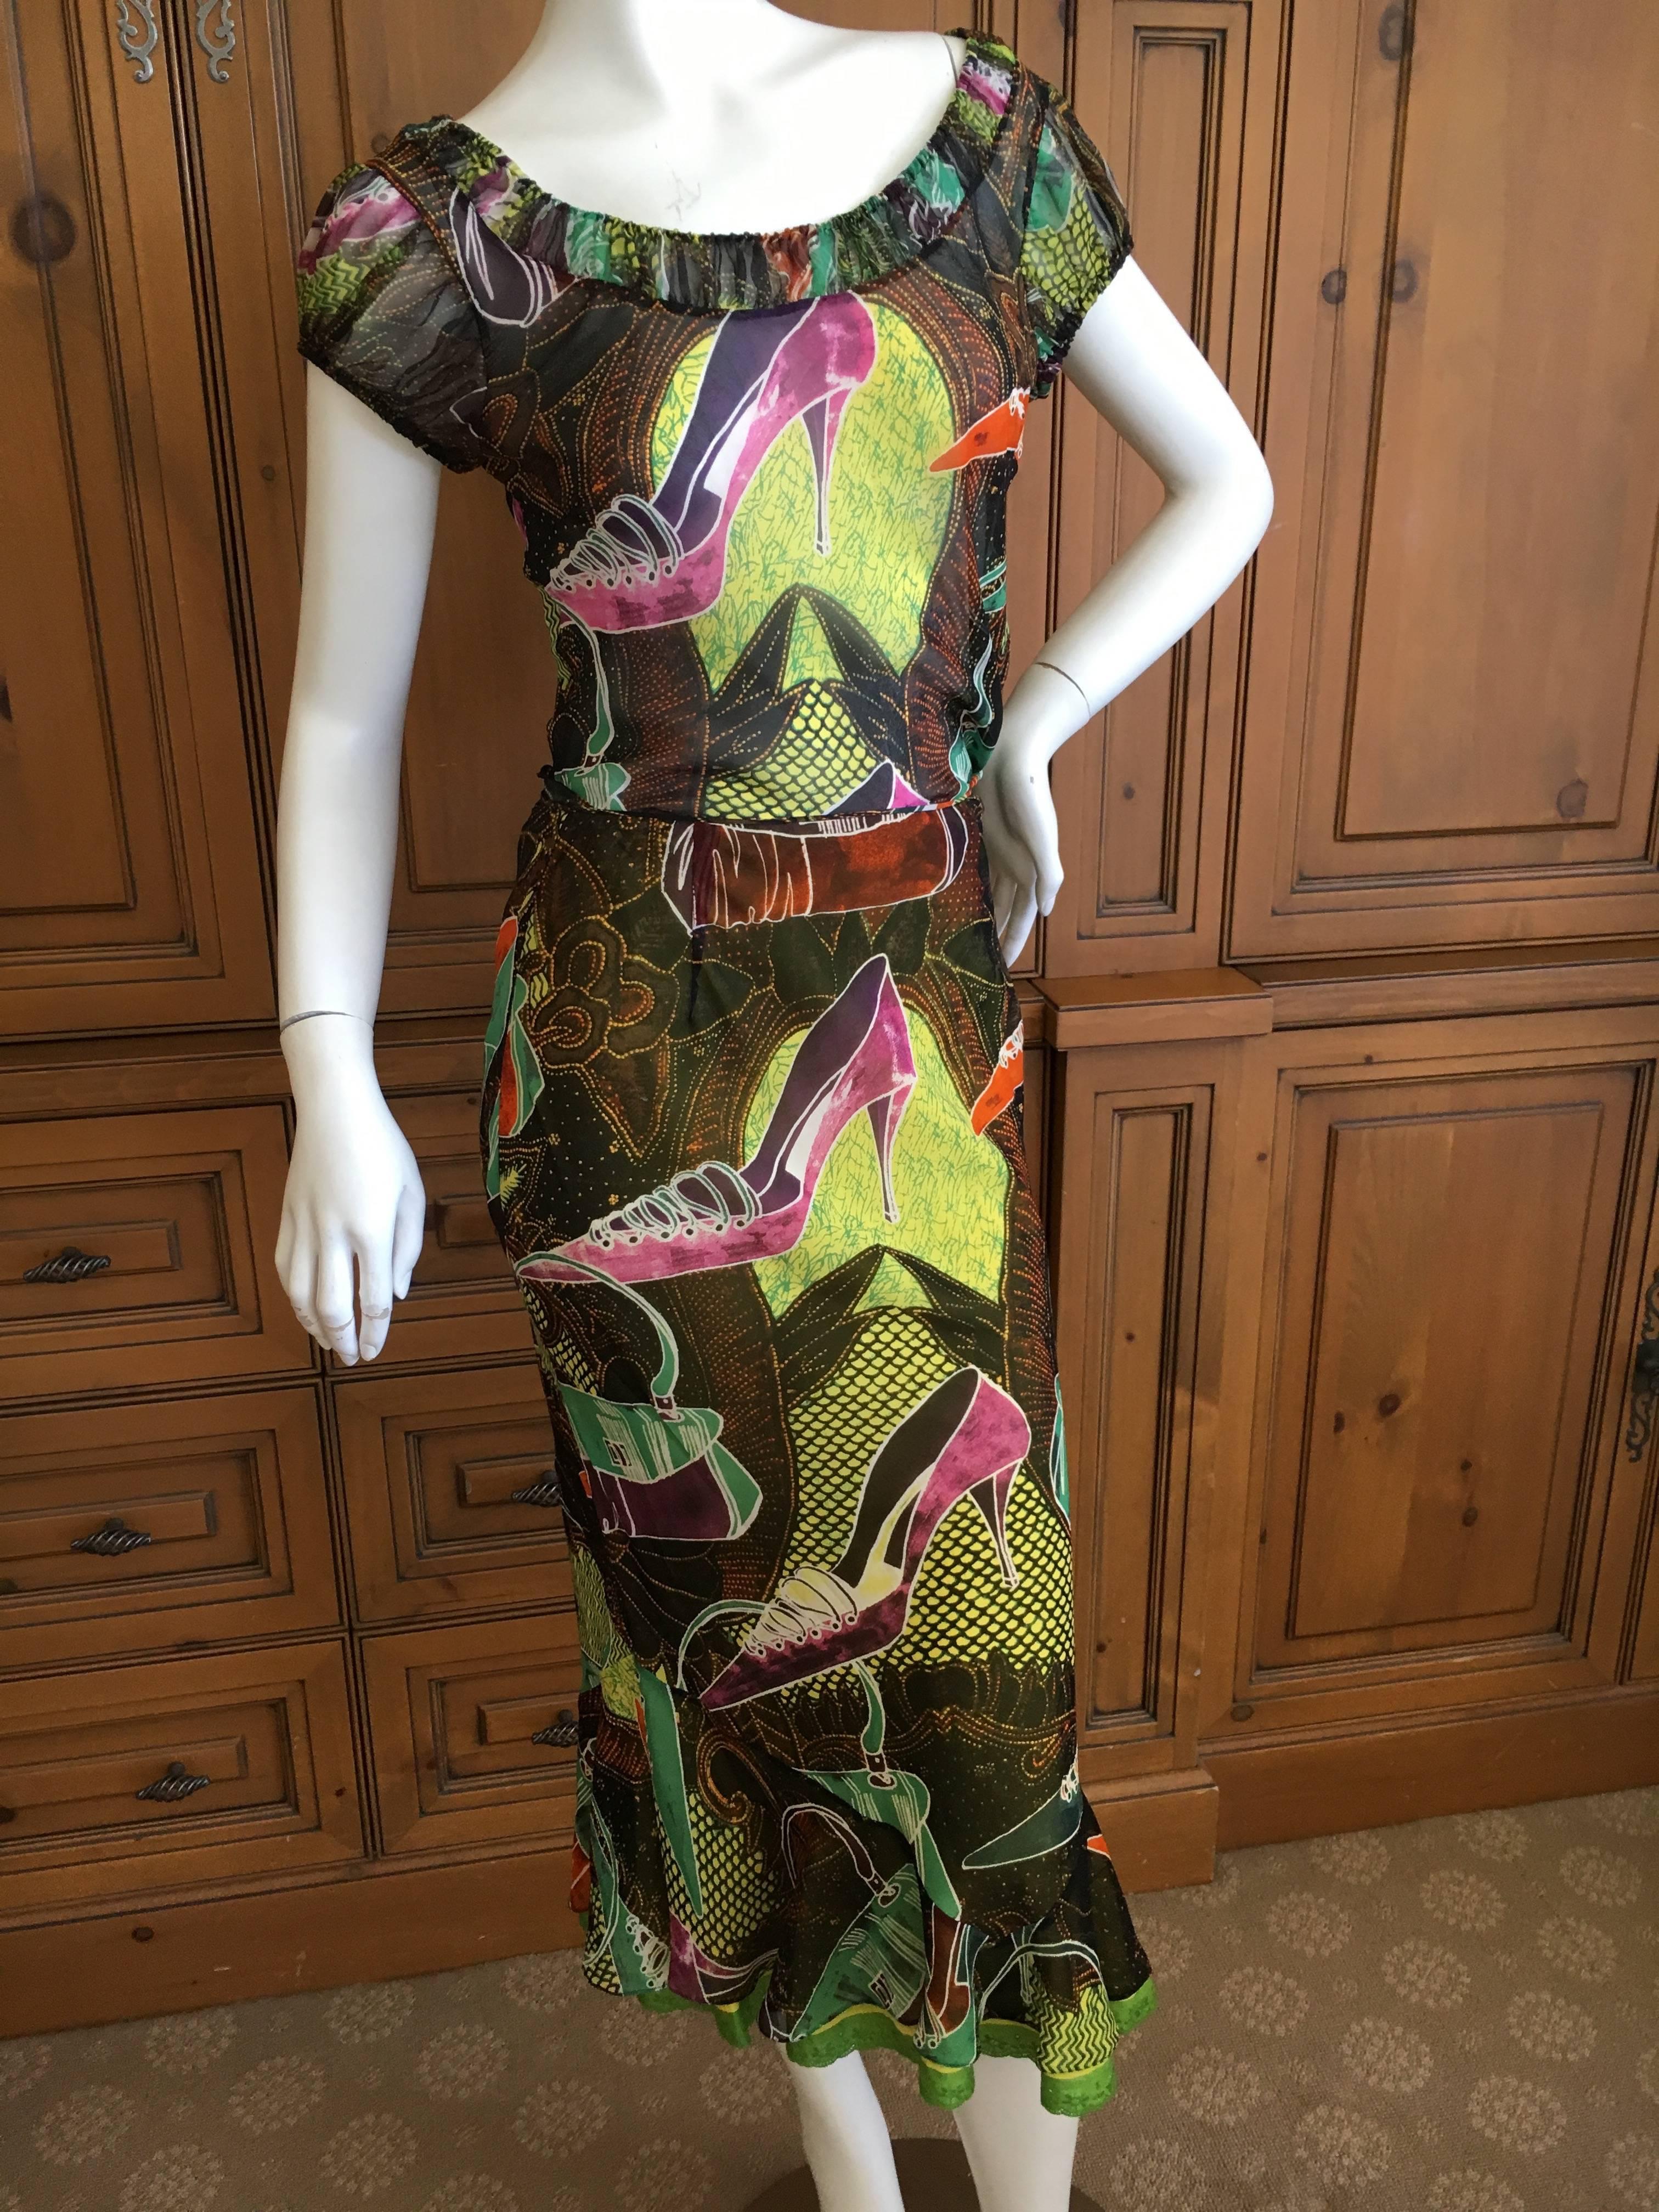 John Galliano Vintage 2002 Charming Shoe Sketch Silk Dress in Two Pieces.

Skirt and top in a sweet shoe sketch by Galliano silk.

Bust 38"

Waist 27"

Hips 42"

Skirt Length 32"

Excellent condition

